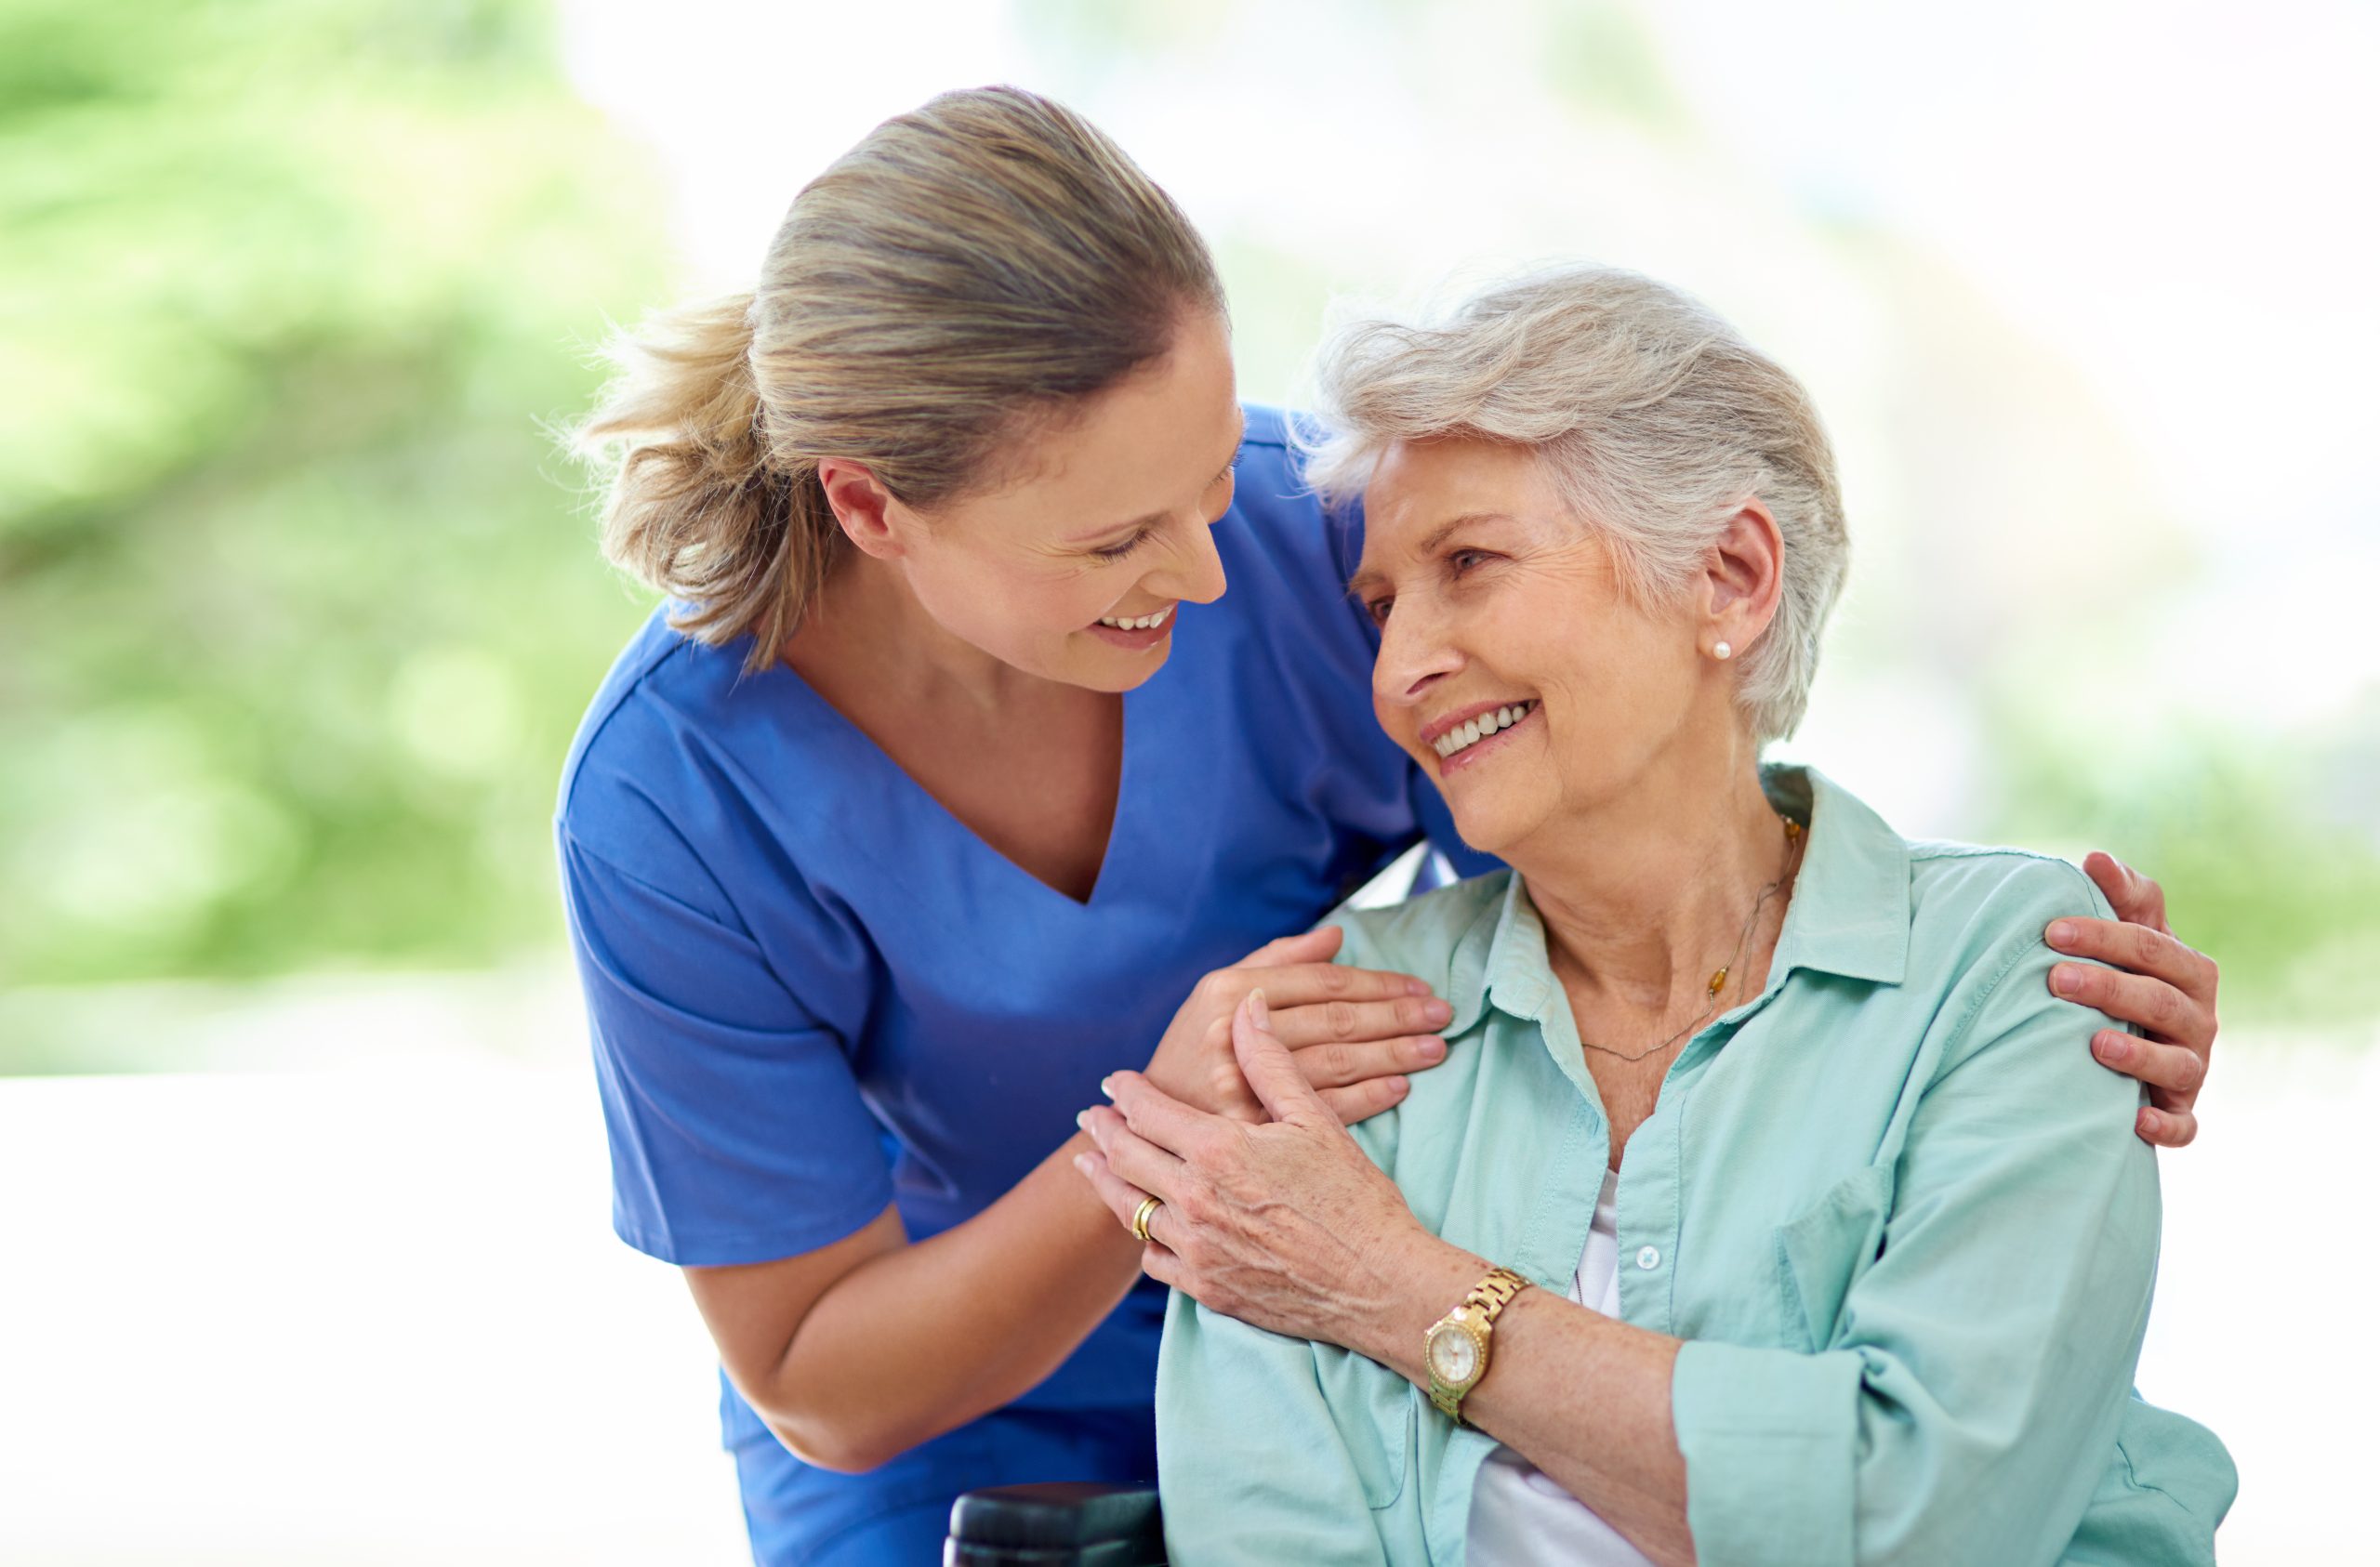 A caring nurse assisting an elderly woman with a gentle touch, providing comfort and support.